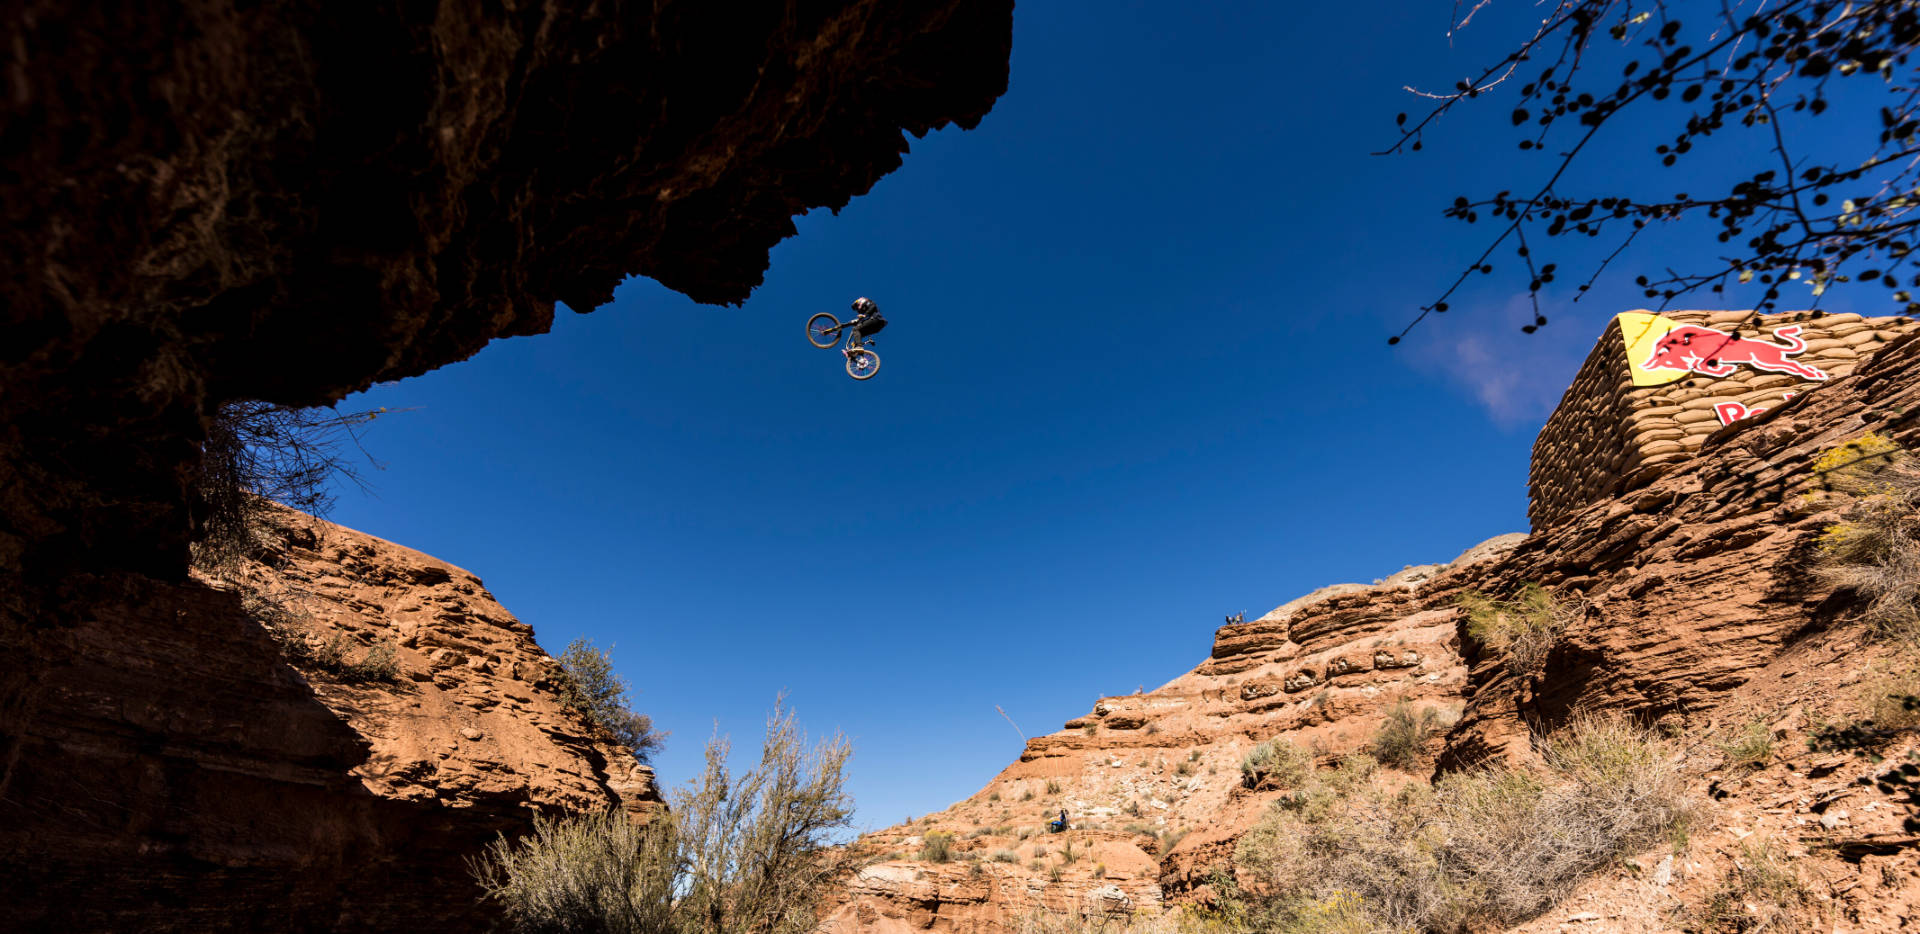 How to Watch Red Bull Rampage 2022